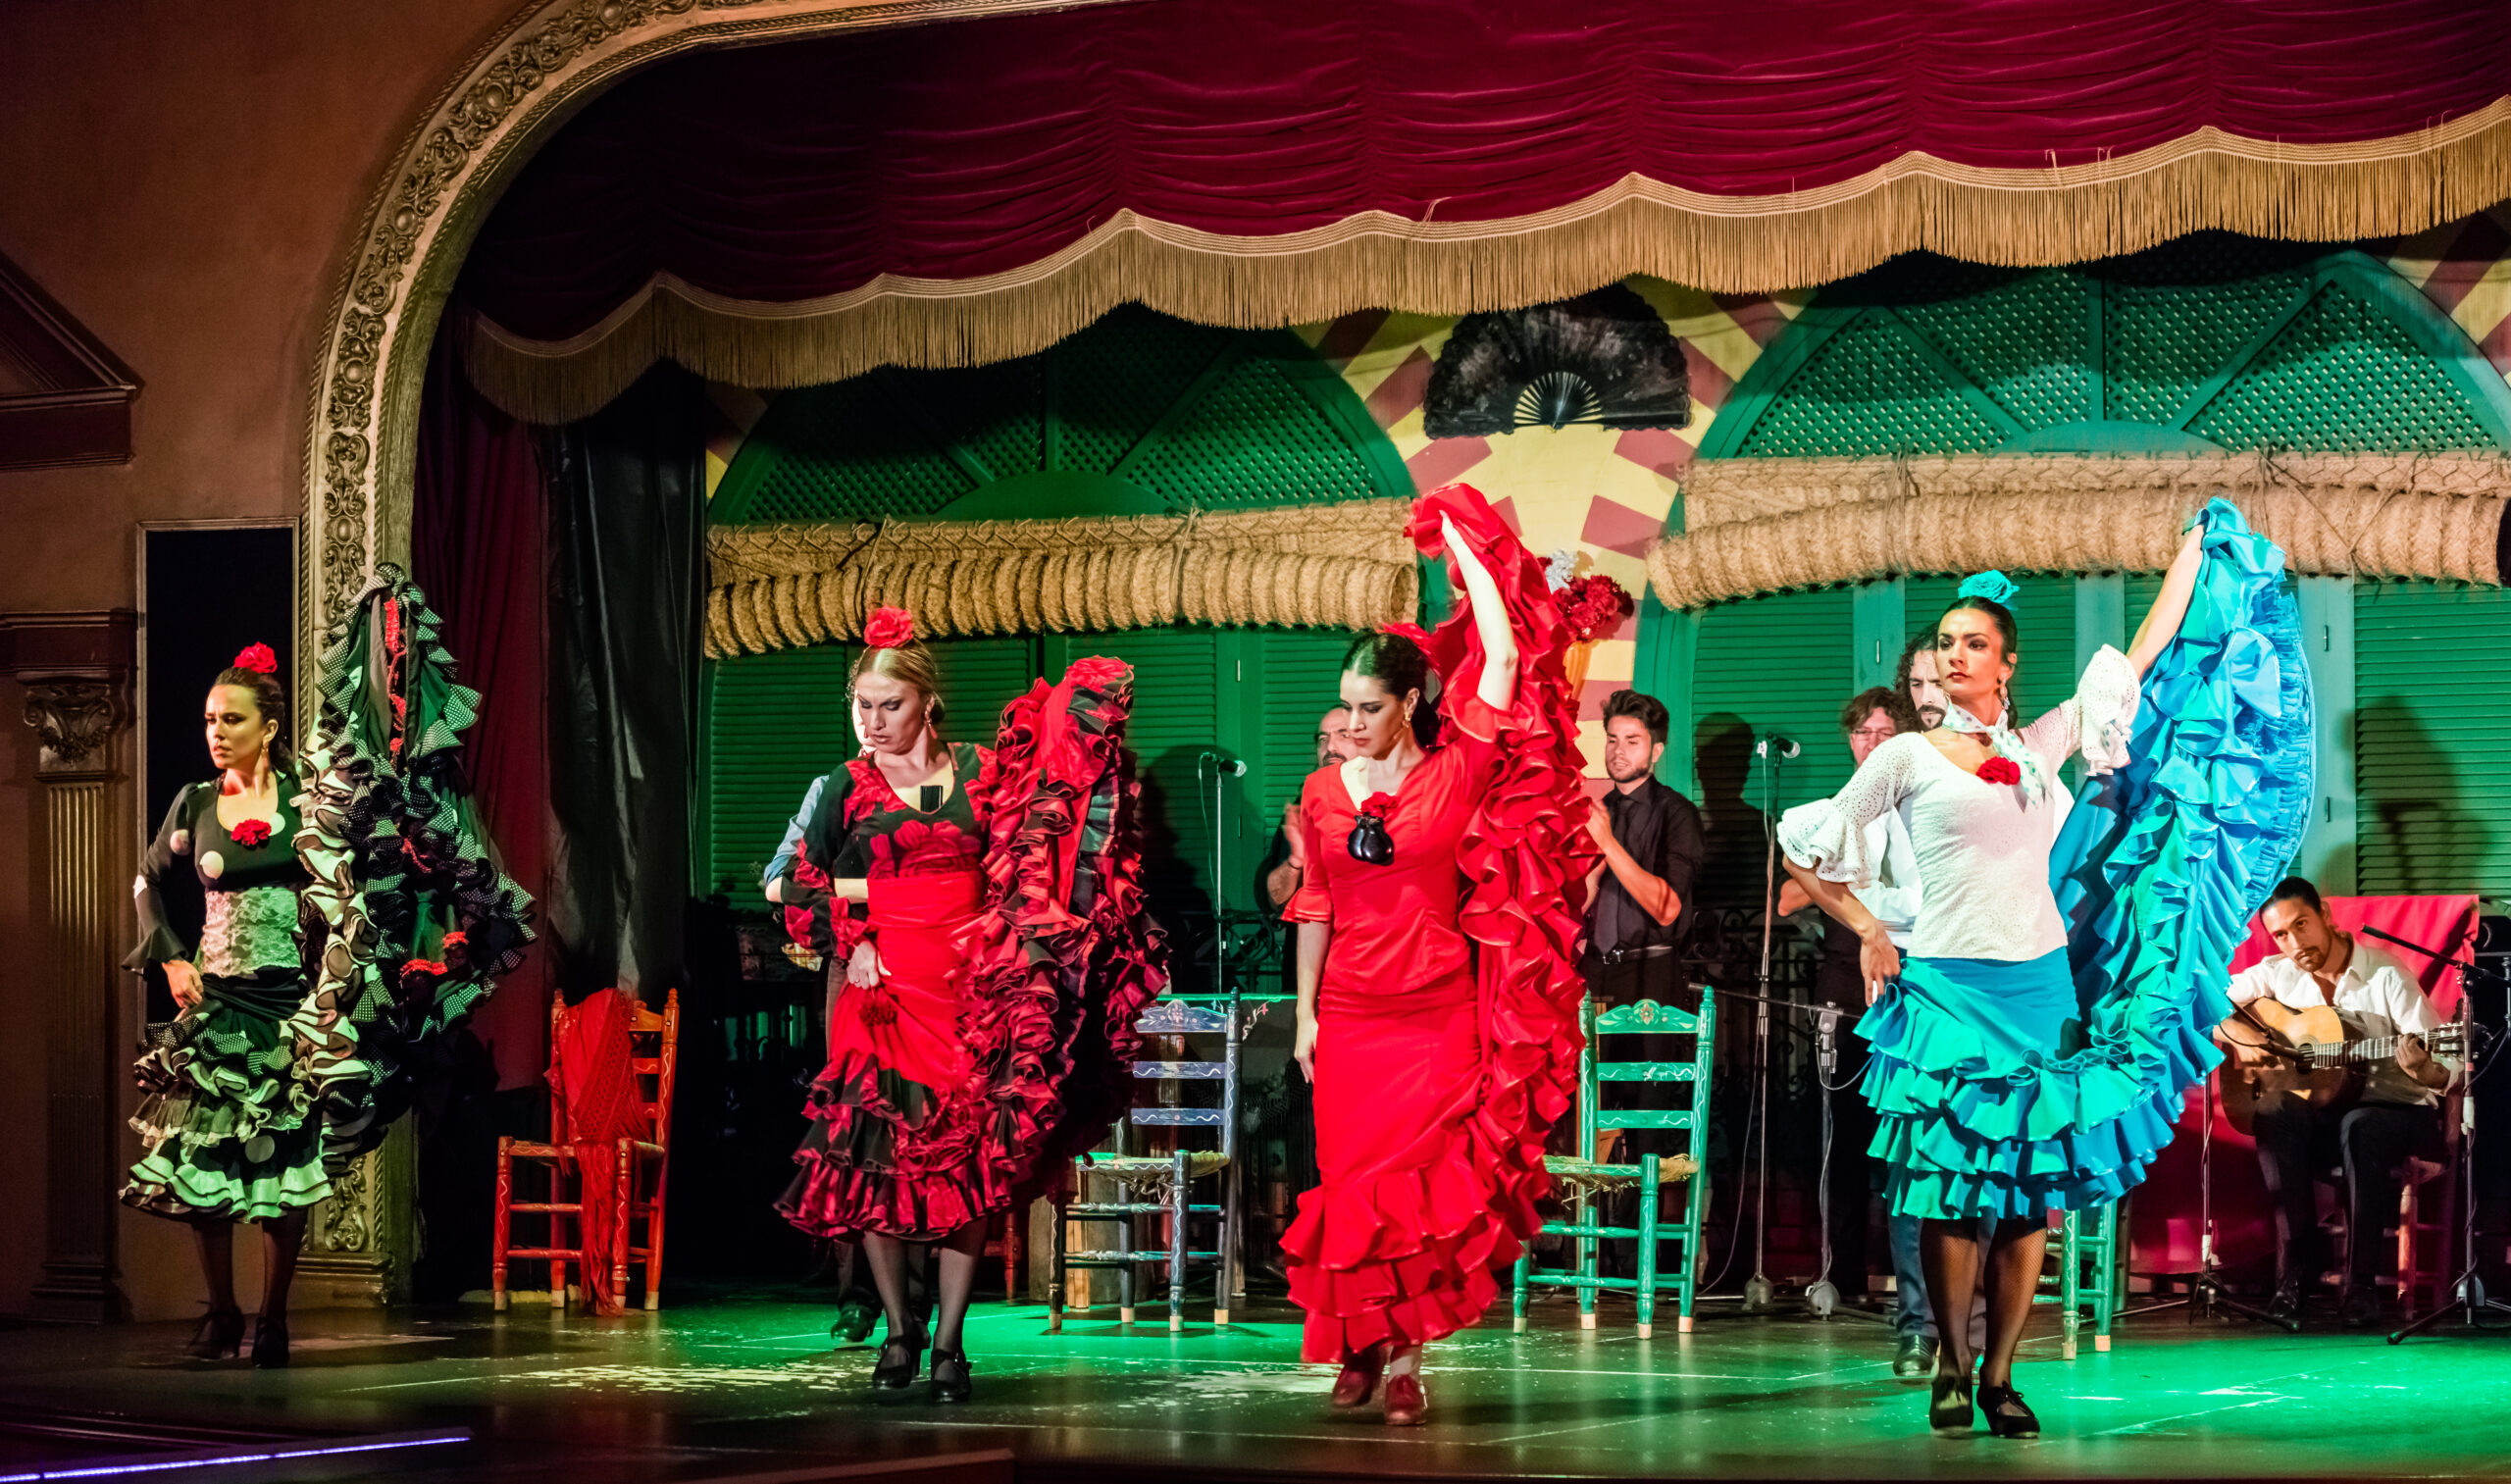 Four flamenco dancers in sevillana dresses perfoming on a stage 